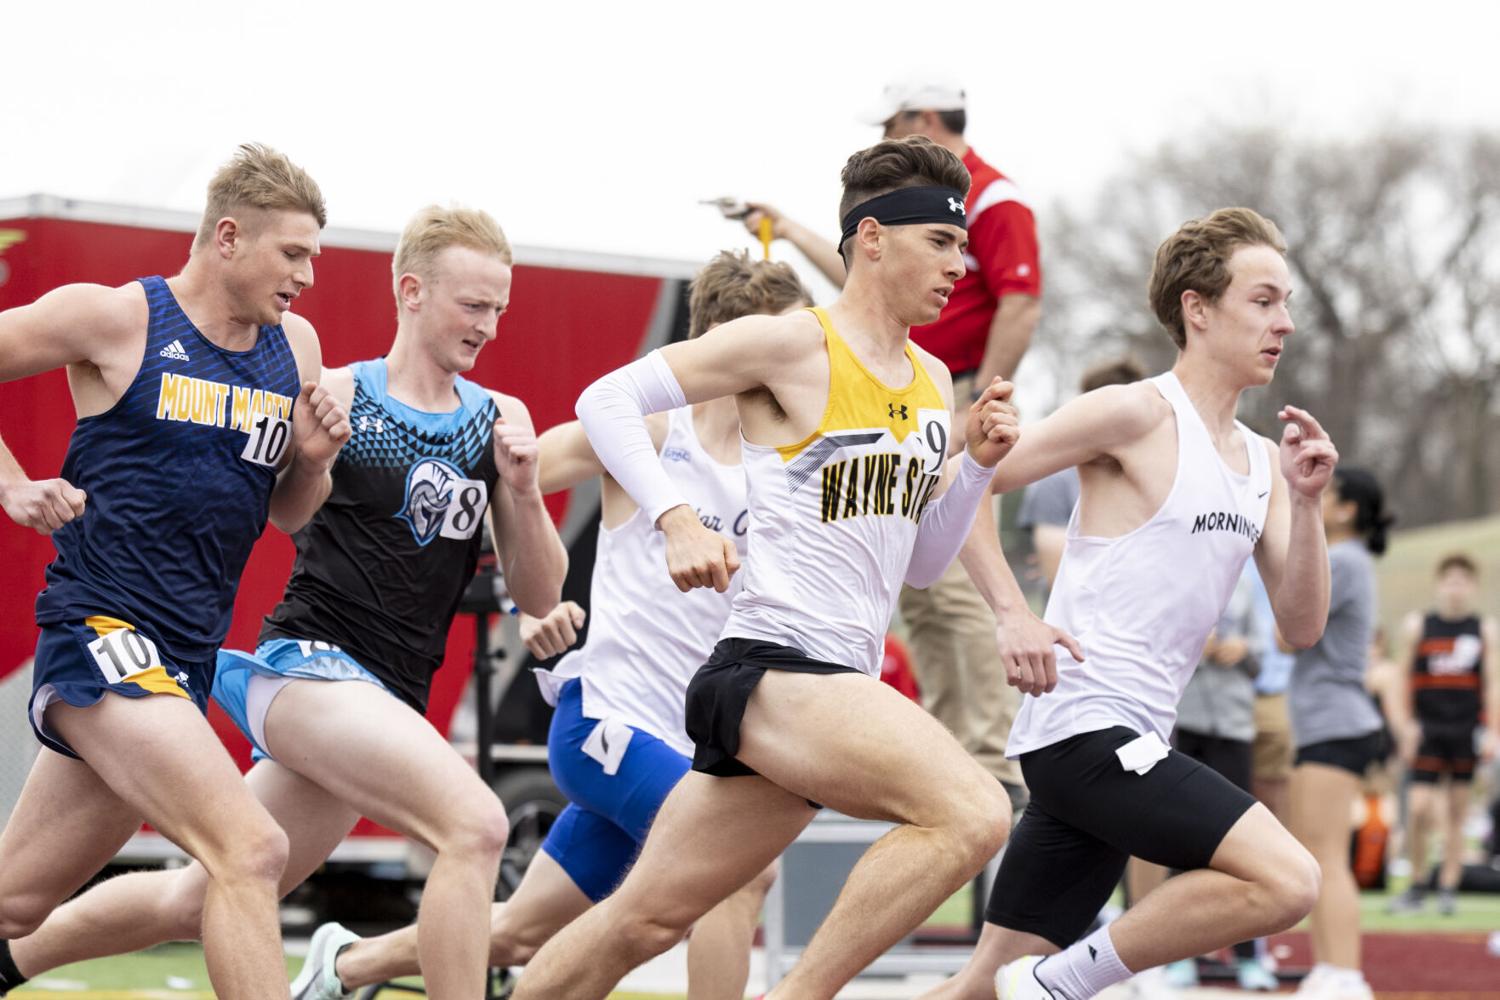 59th Sioux City Relays set to commence on Friday [Video]